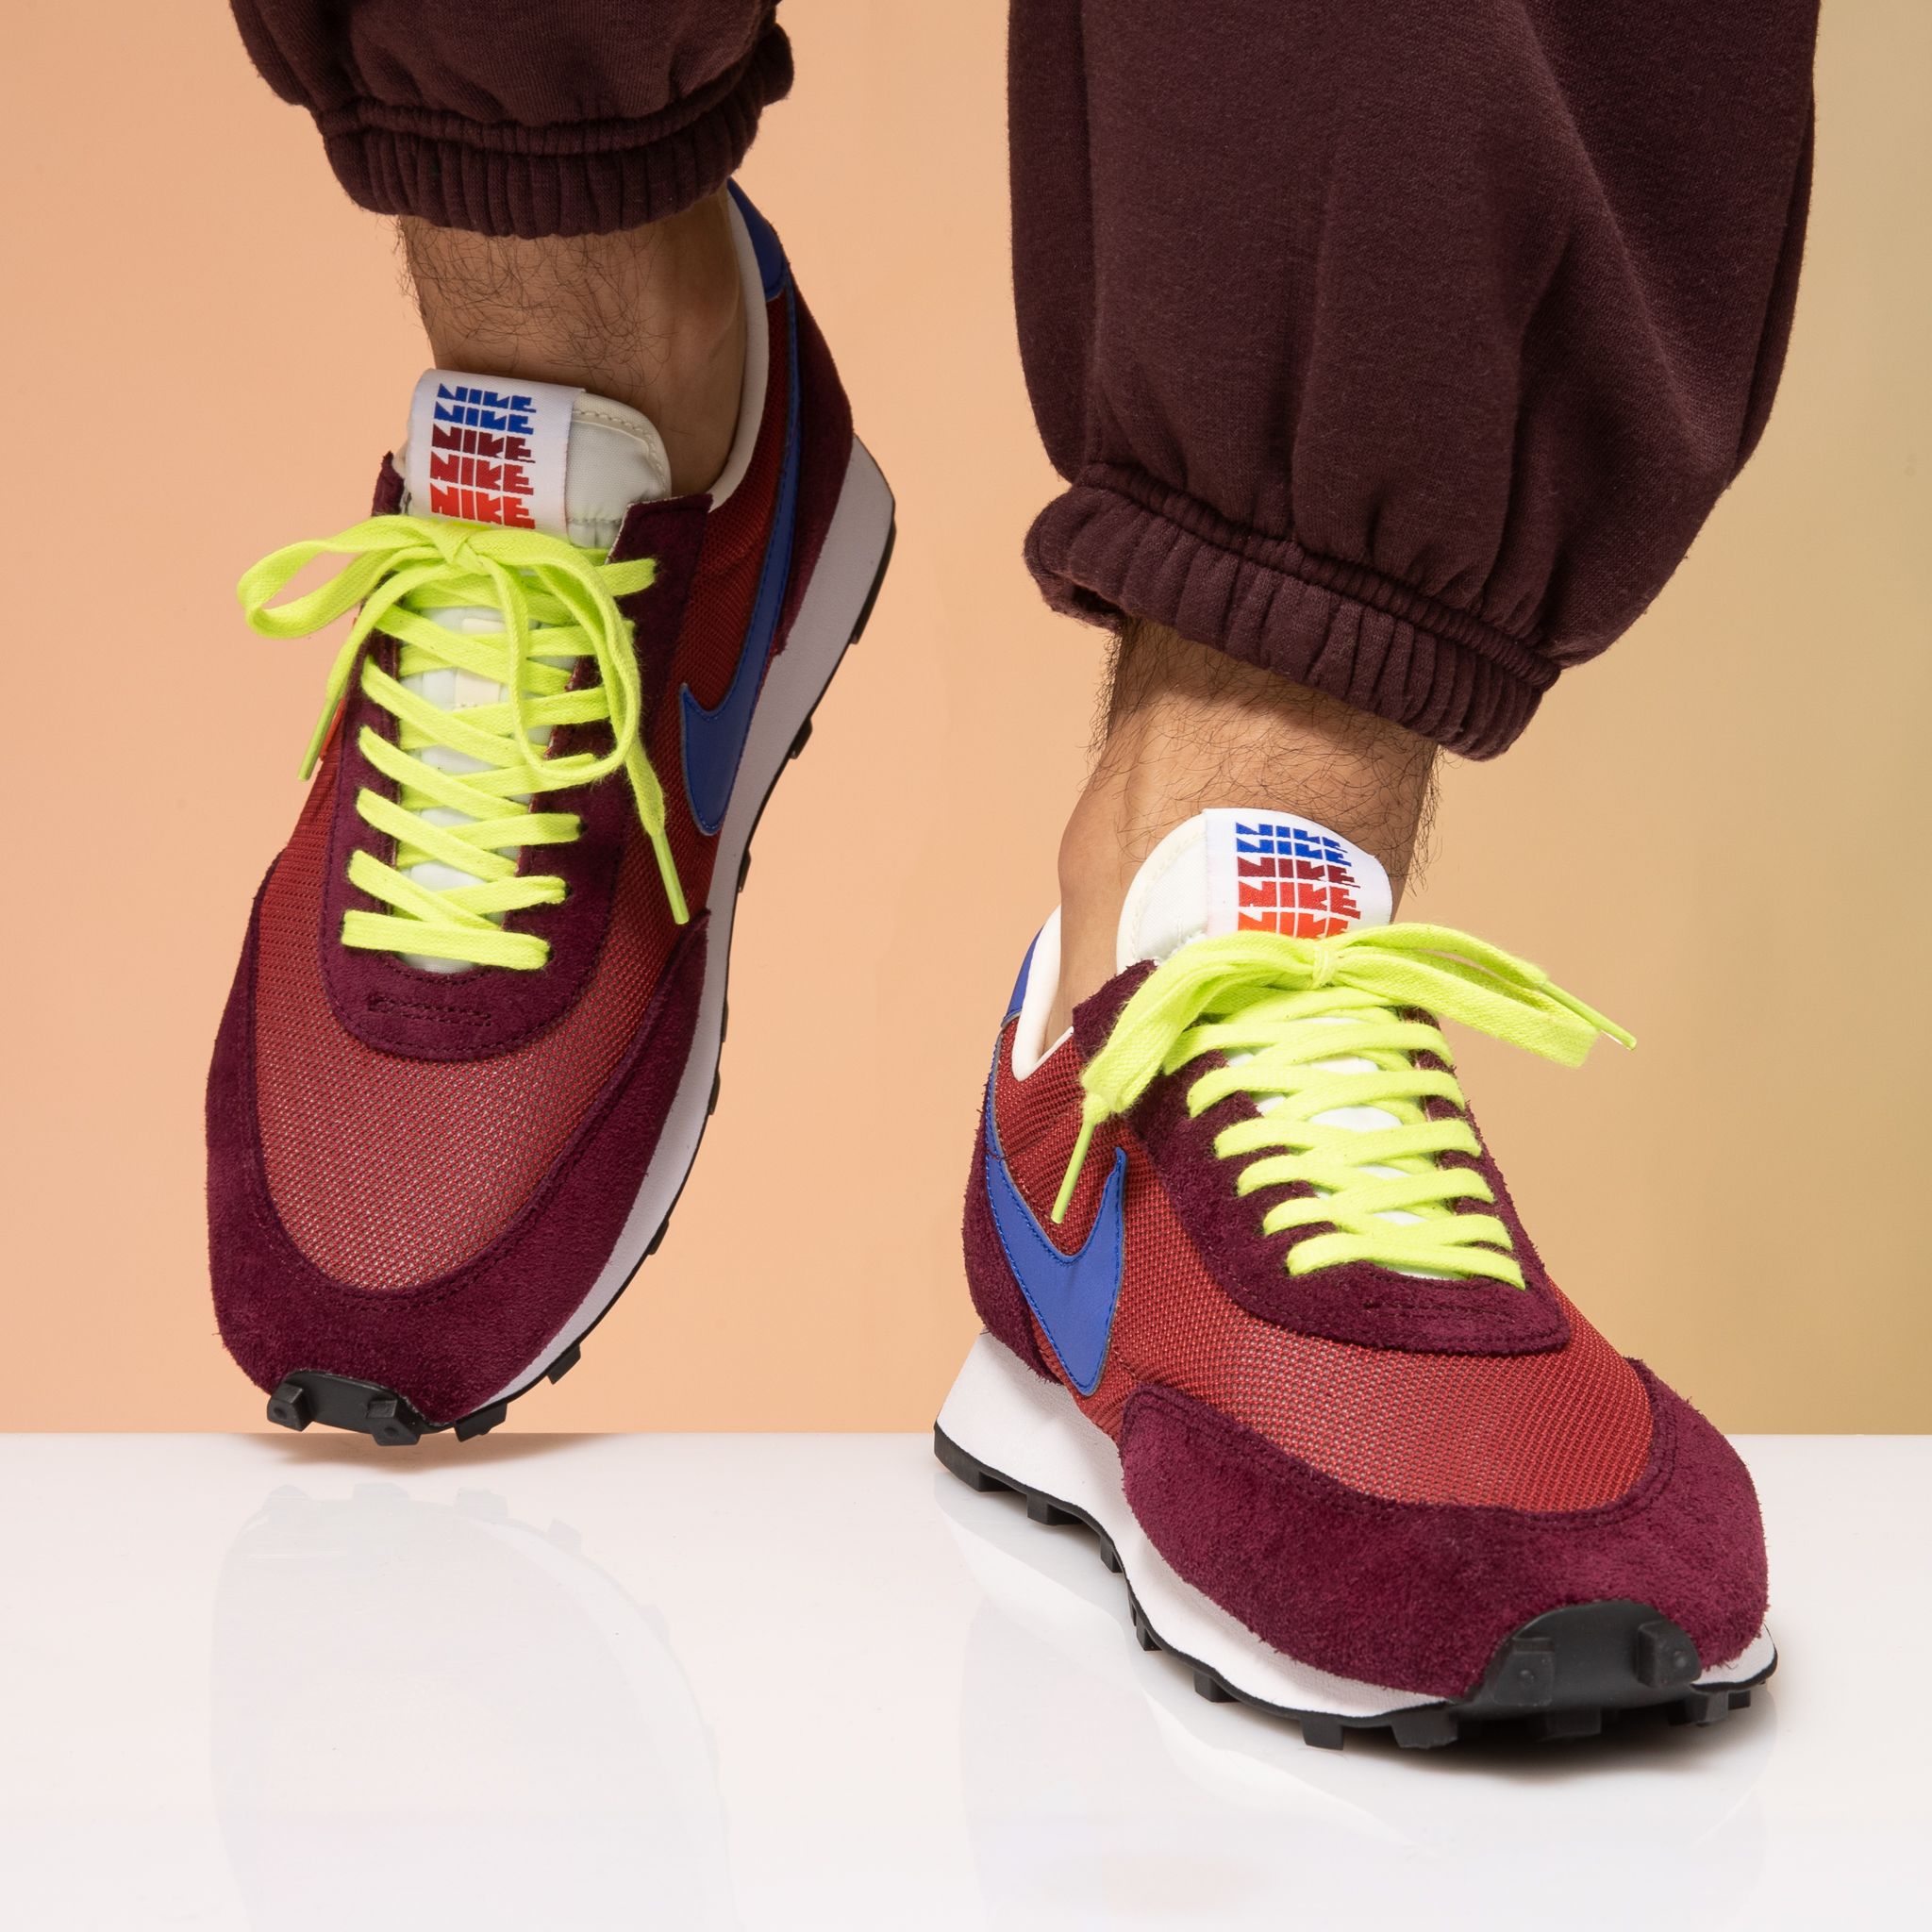 Embotellamiento Inhibir Insatisfecho Titolo on Twitter: "the latest Nike Daybreak appears in autumnal colors  with two different swooshes. Available from now online ➡️  https://t.co/YqBmIBviHM US 7 (40) - US 11 (45) style code 🔎 CQ6358-600 #